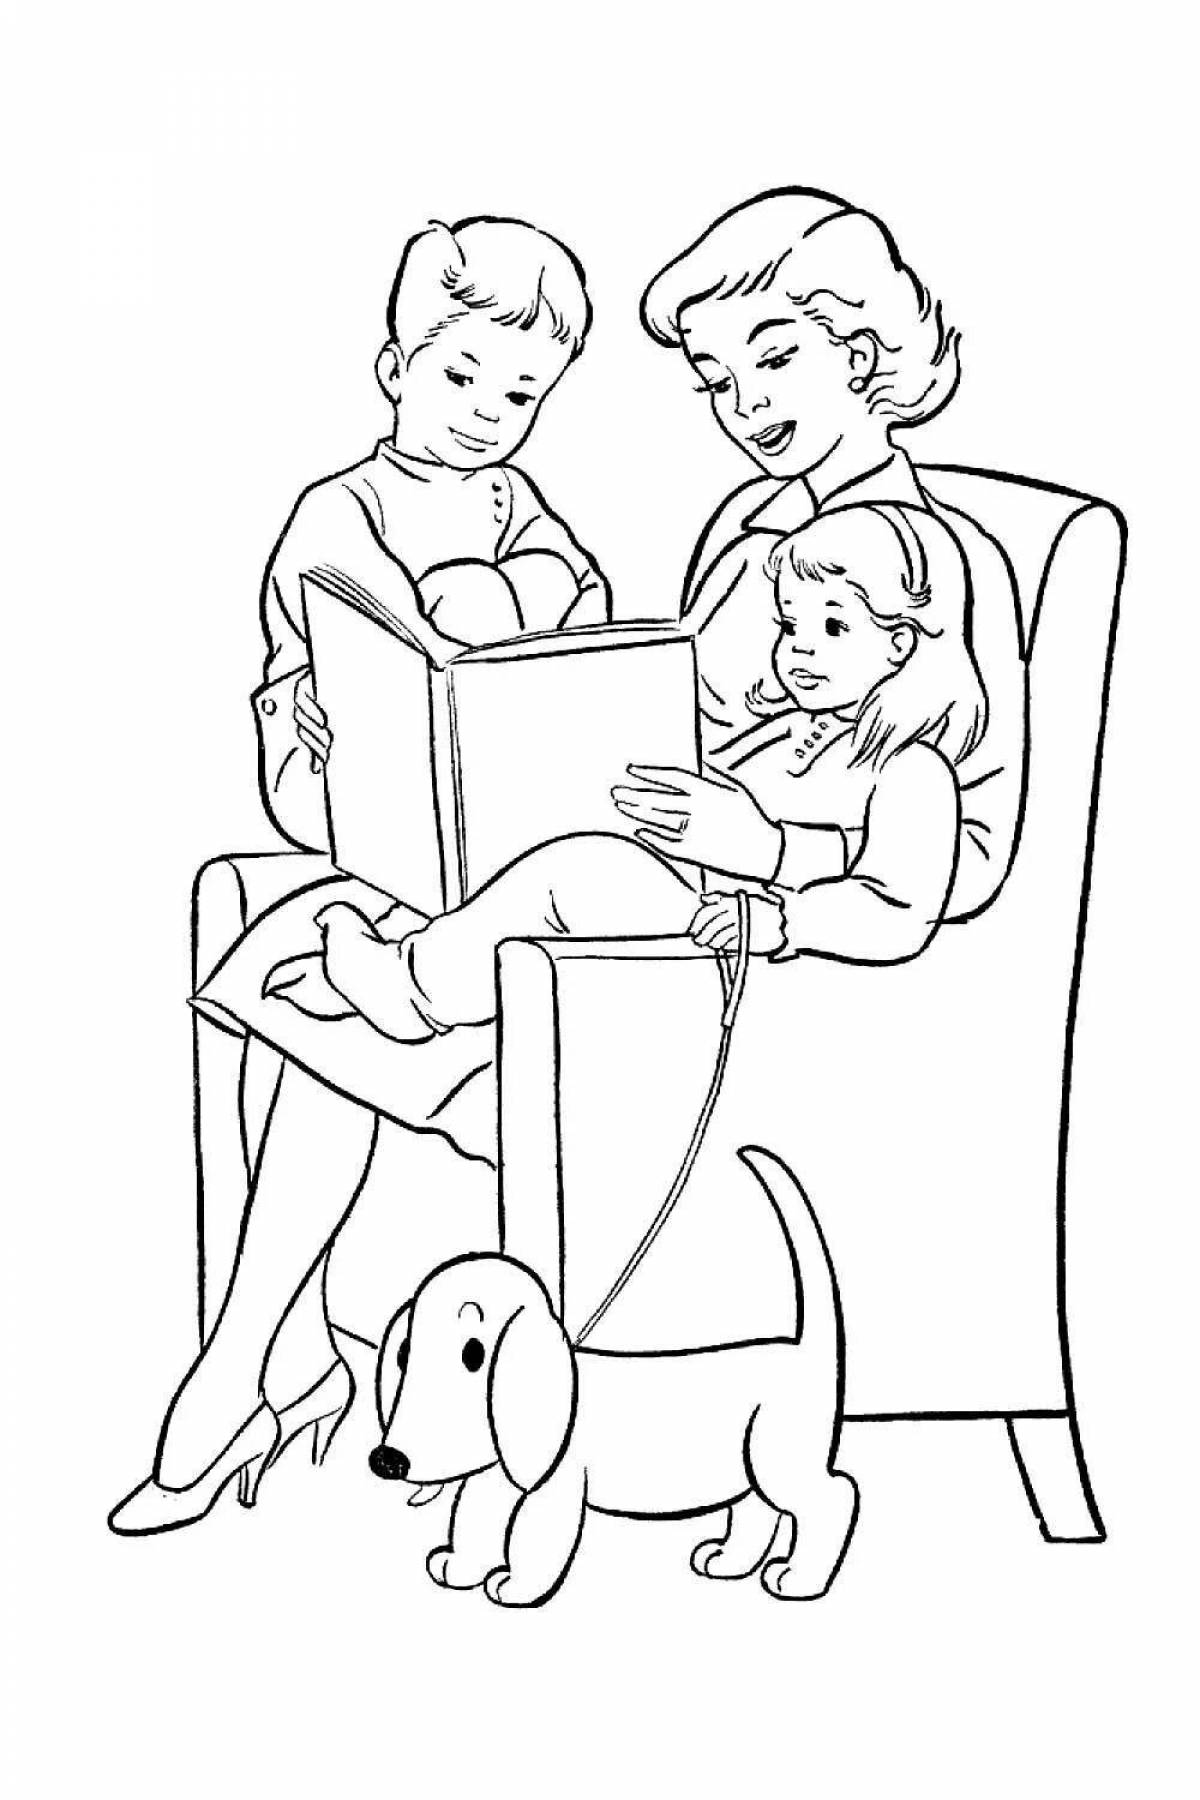 Coloring page cheerful mom and baby